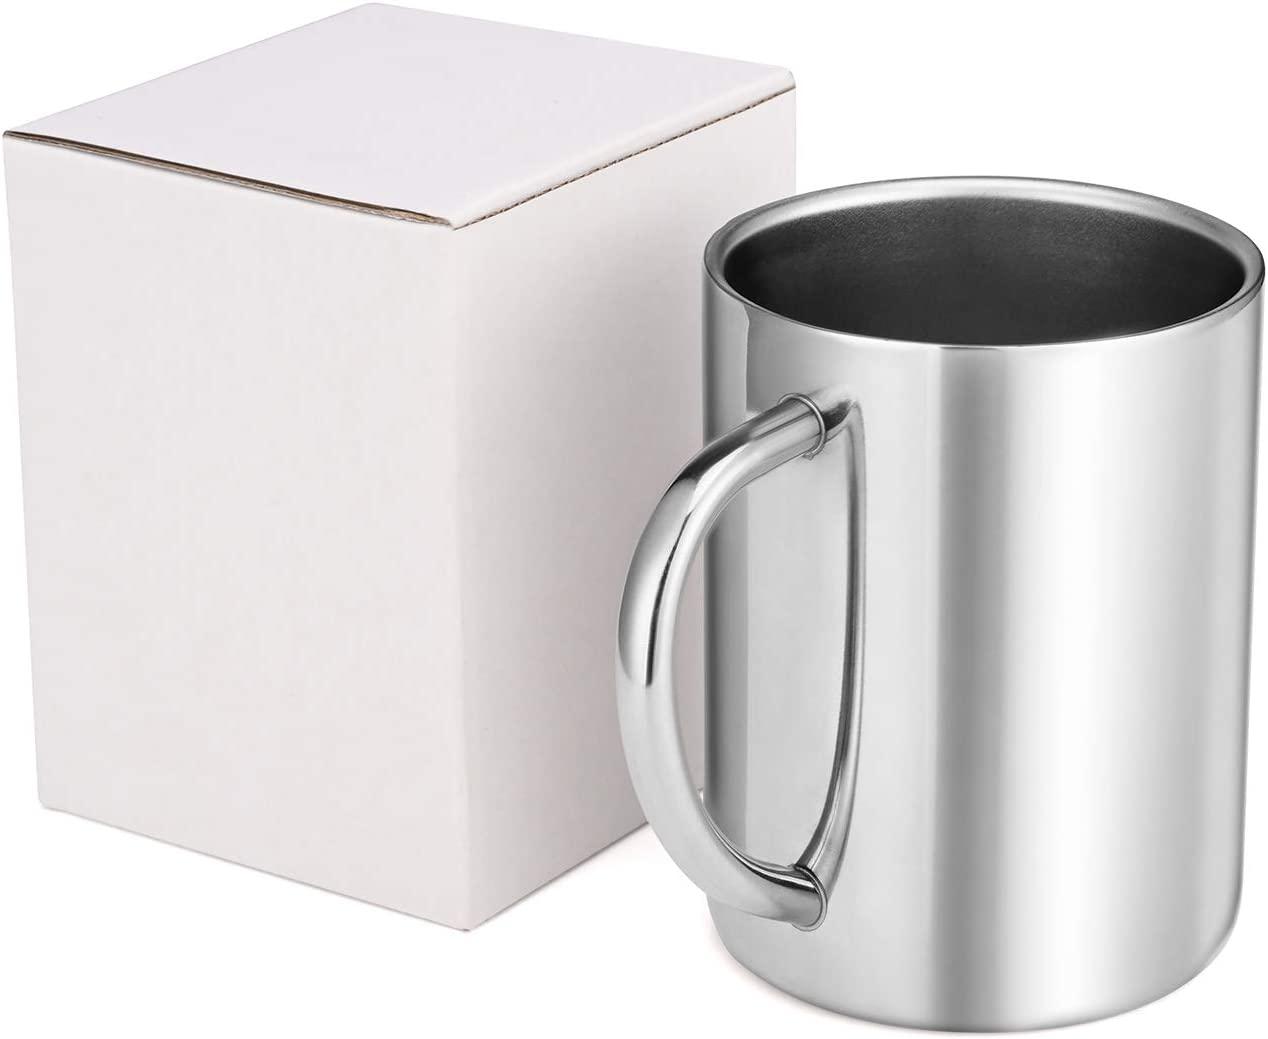 Stainless Steel Metal Cup Beer Cups Travel Camping Mugs Drinking